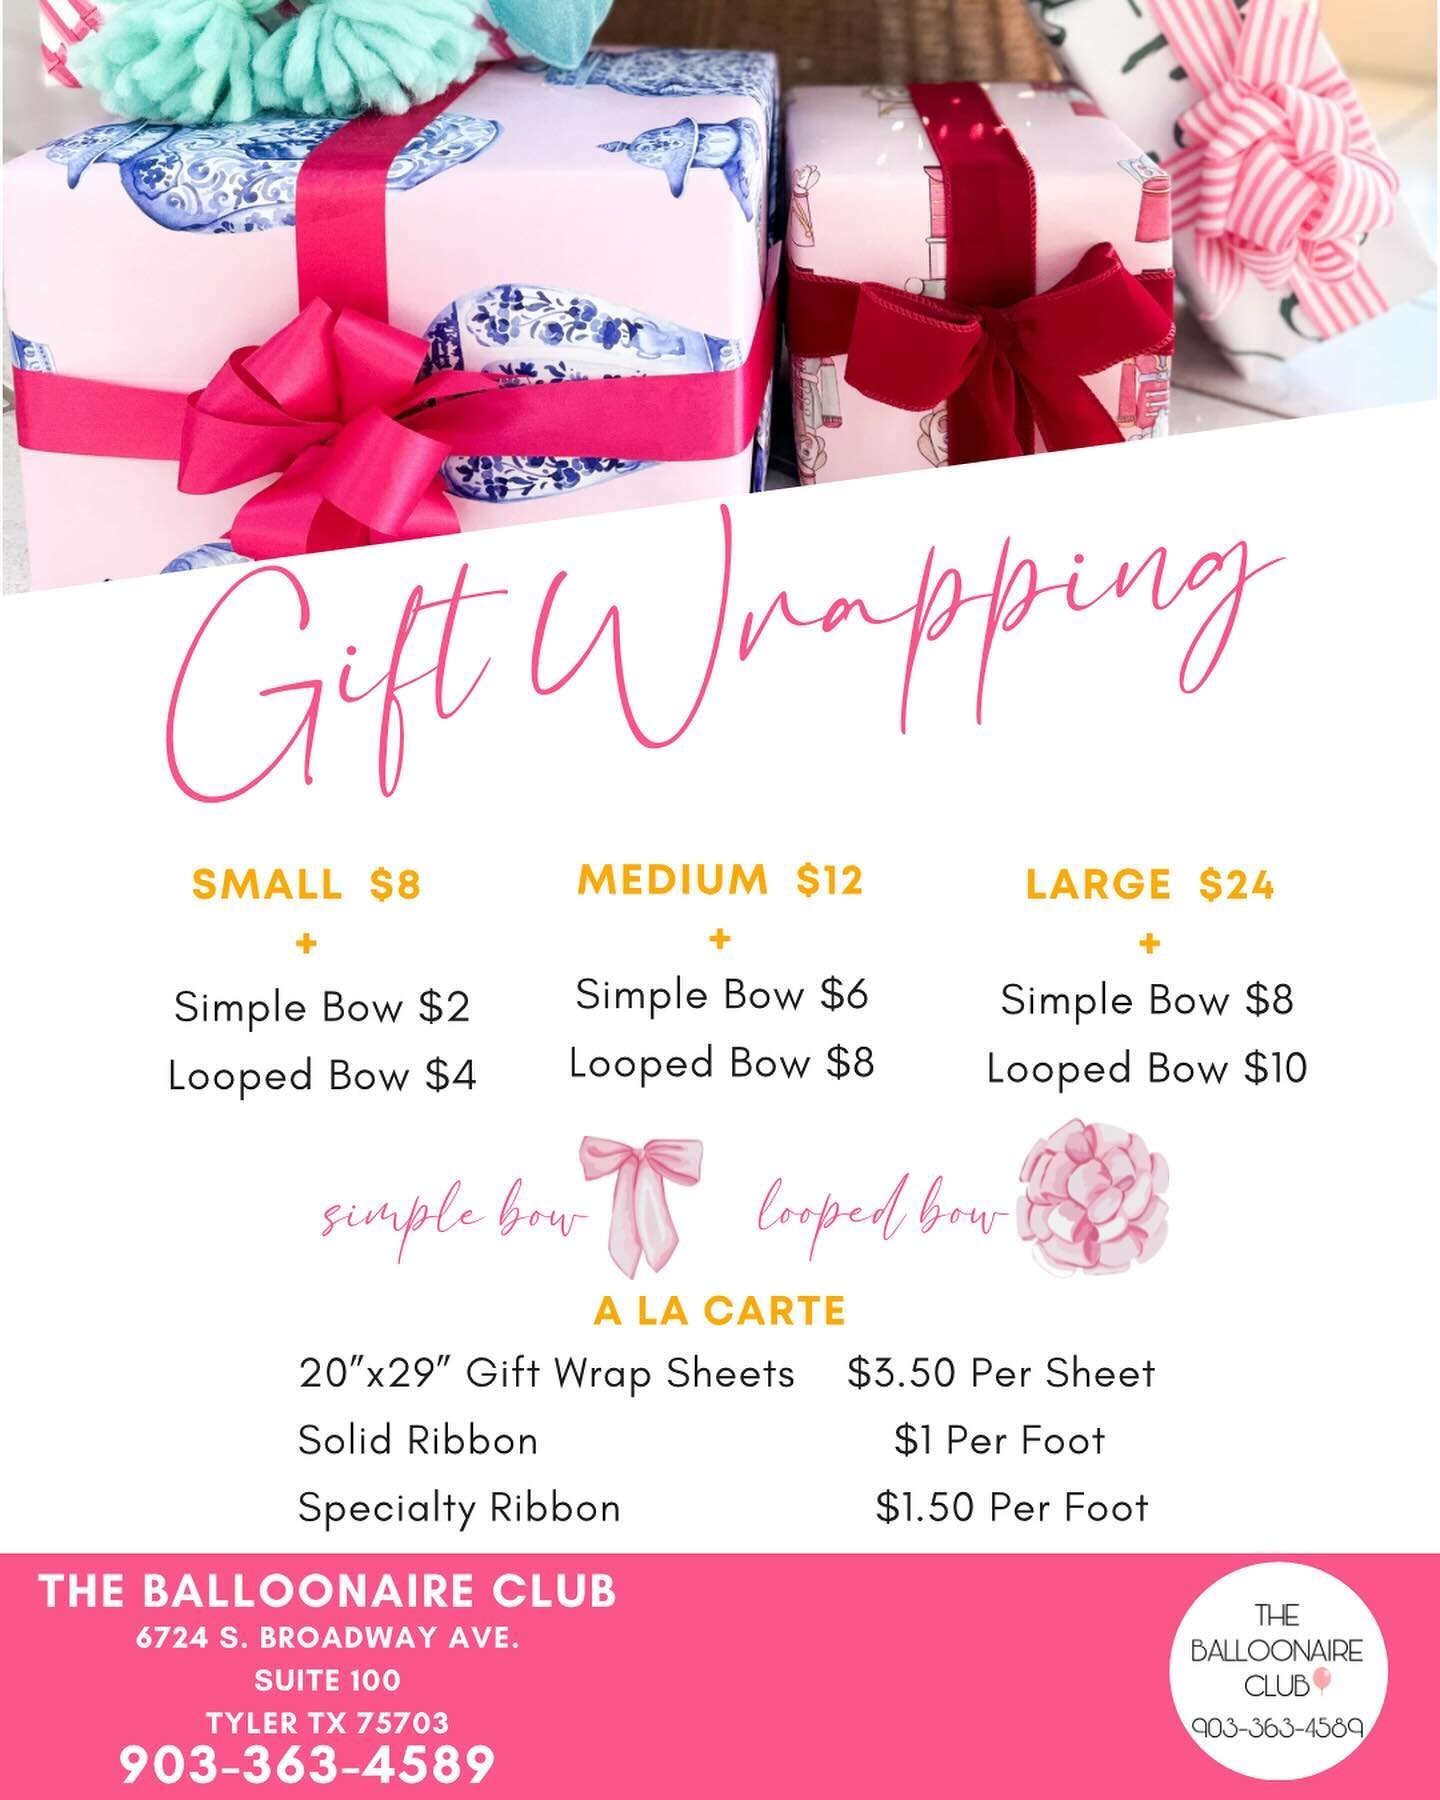 Effortless gifting is our specialty! 🎁✨ Get your presents wrapped just in time for the holidays. We are open from 10am-6pm Tues.-Fri. &amp; 10am-3pm on Saturdays! 
Genuine joy, no frills. #giftwrapping #nostresszone